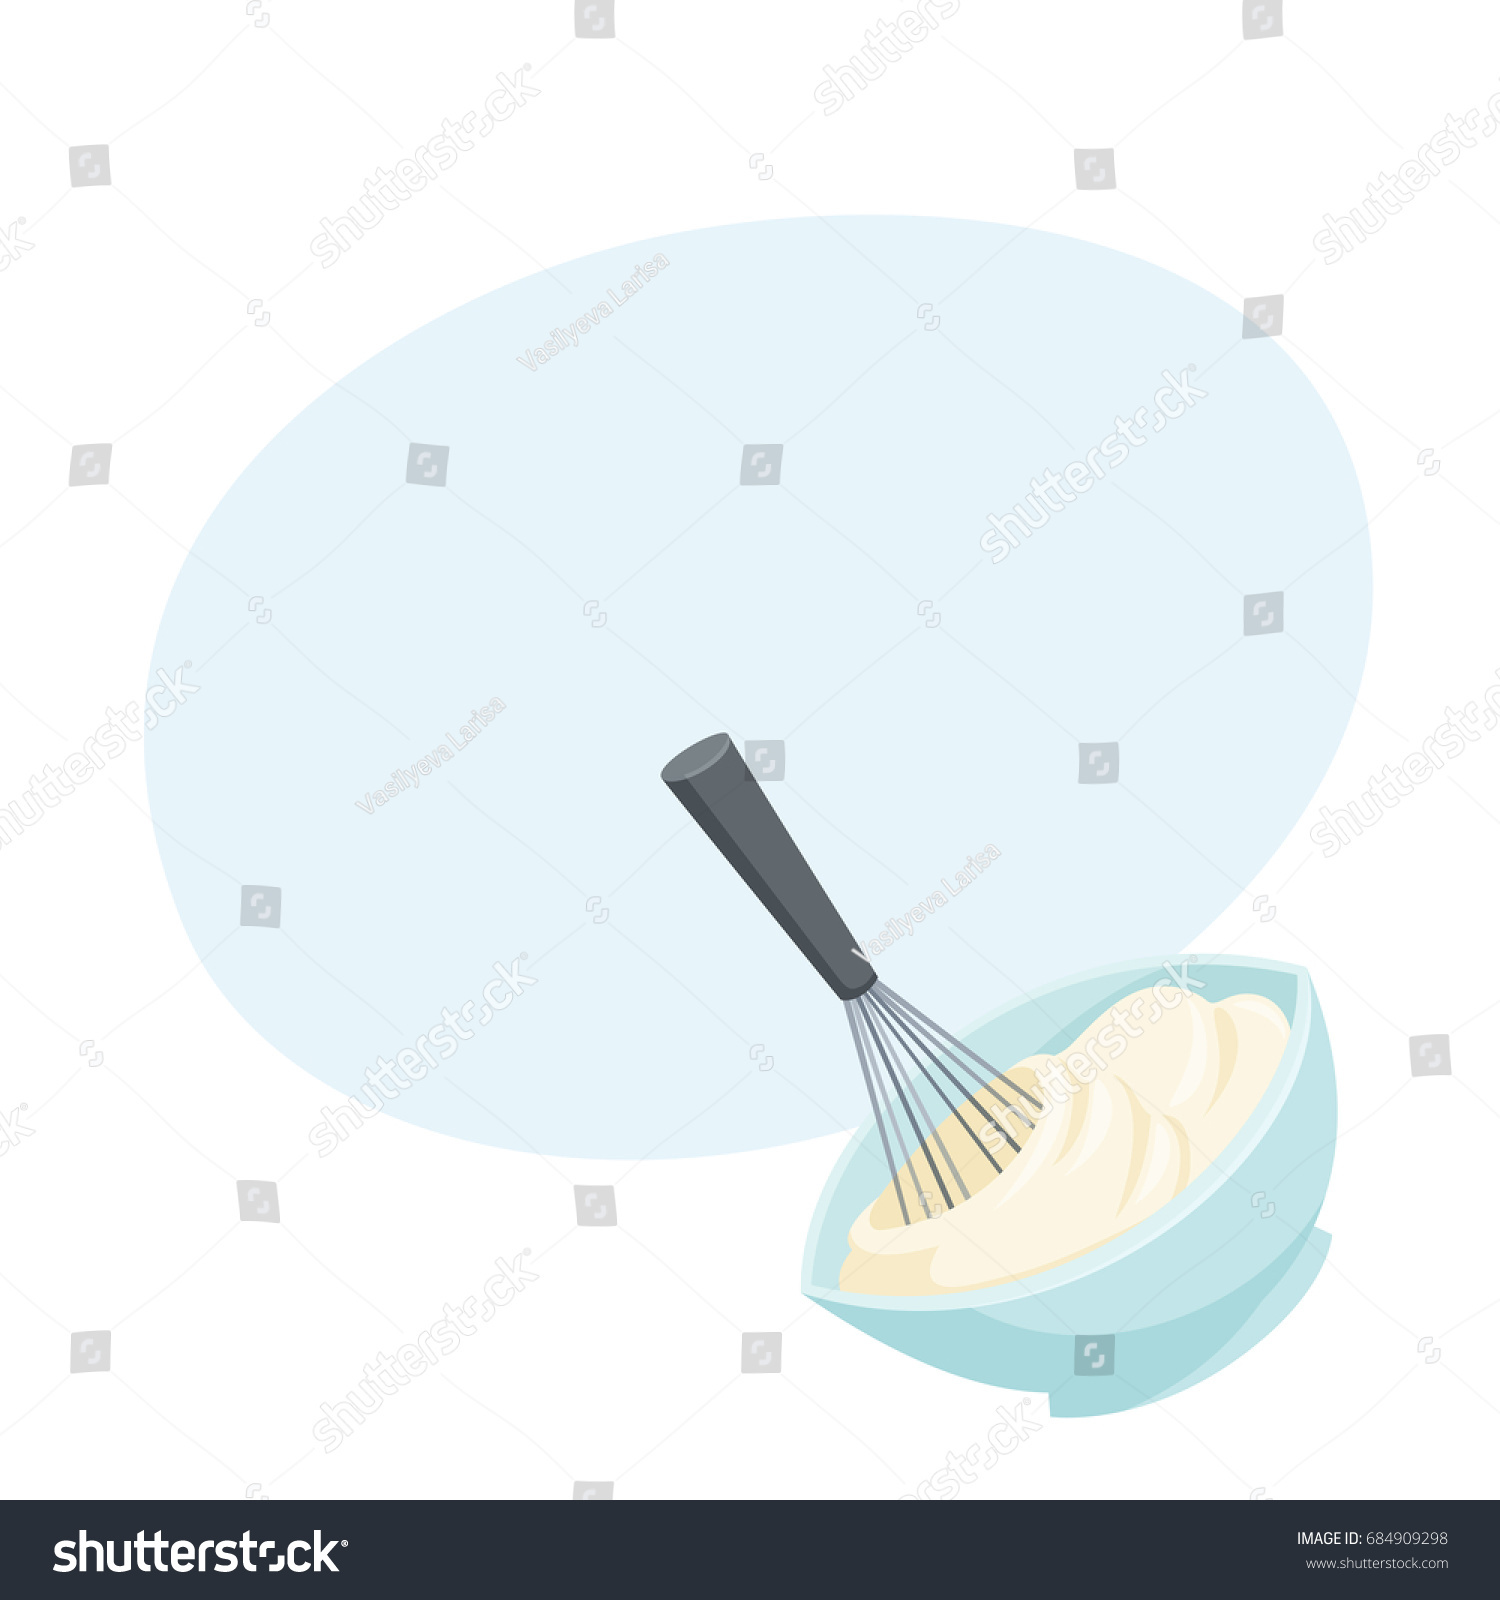 SVG of Whisk whipped cream. Bakery process vector illustration. Kitchenware, cooking utensil isolated on white. Tasty food recipe svg